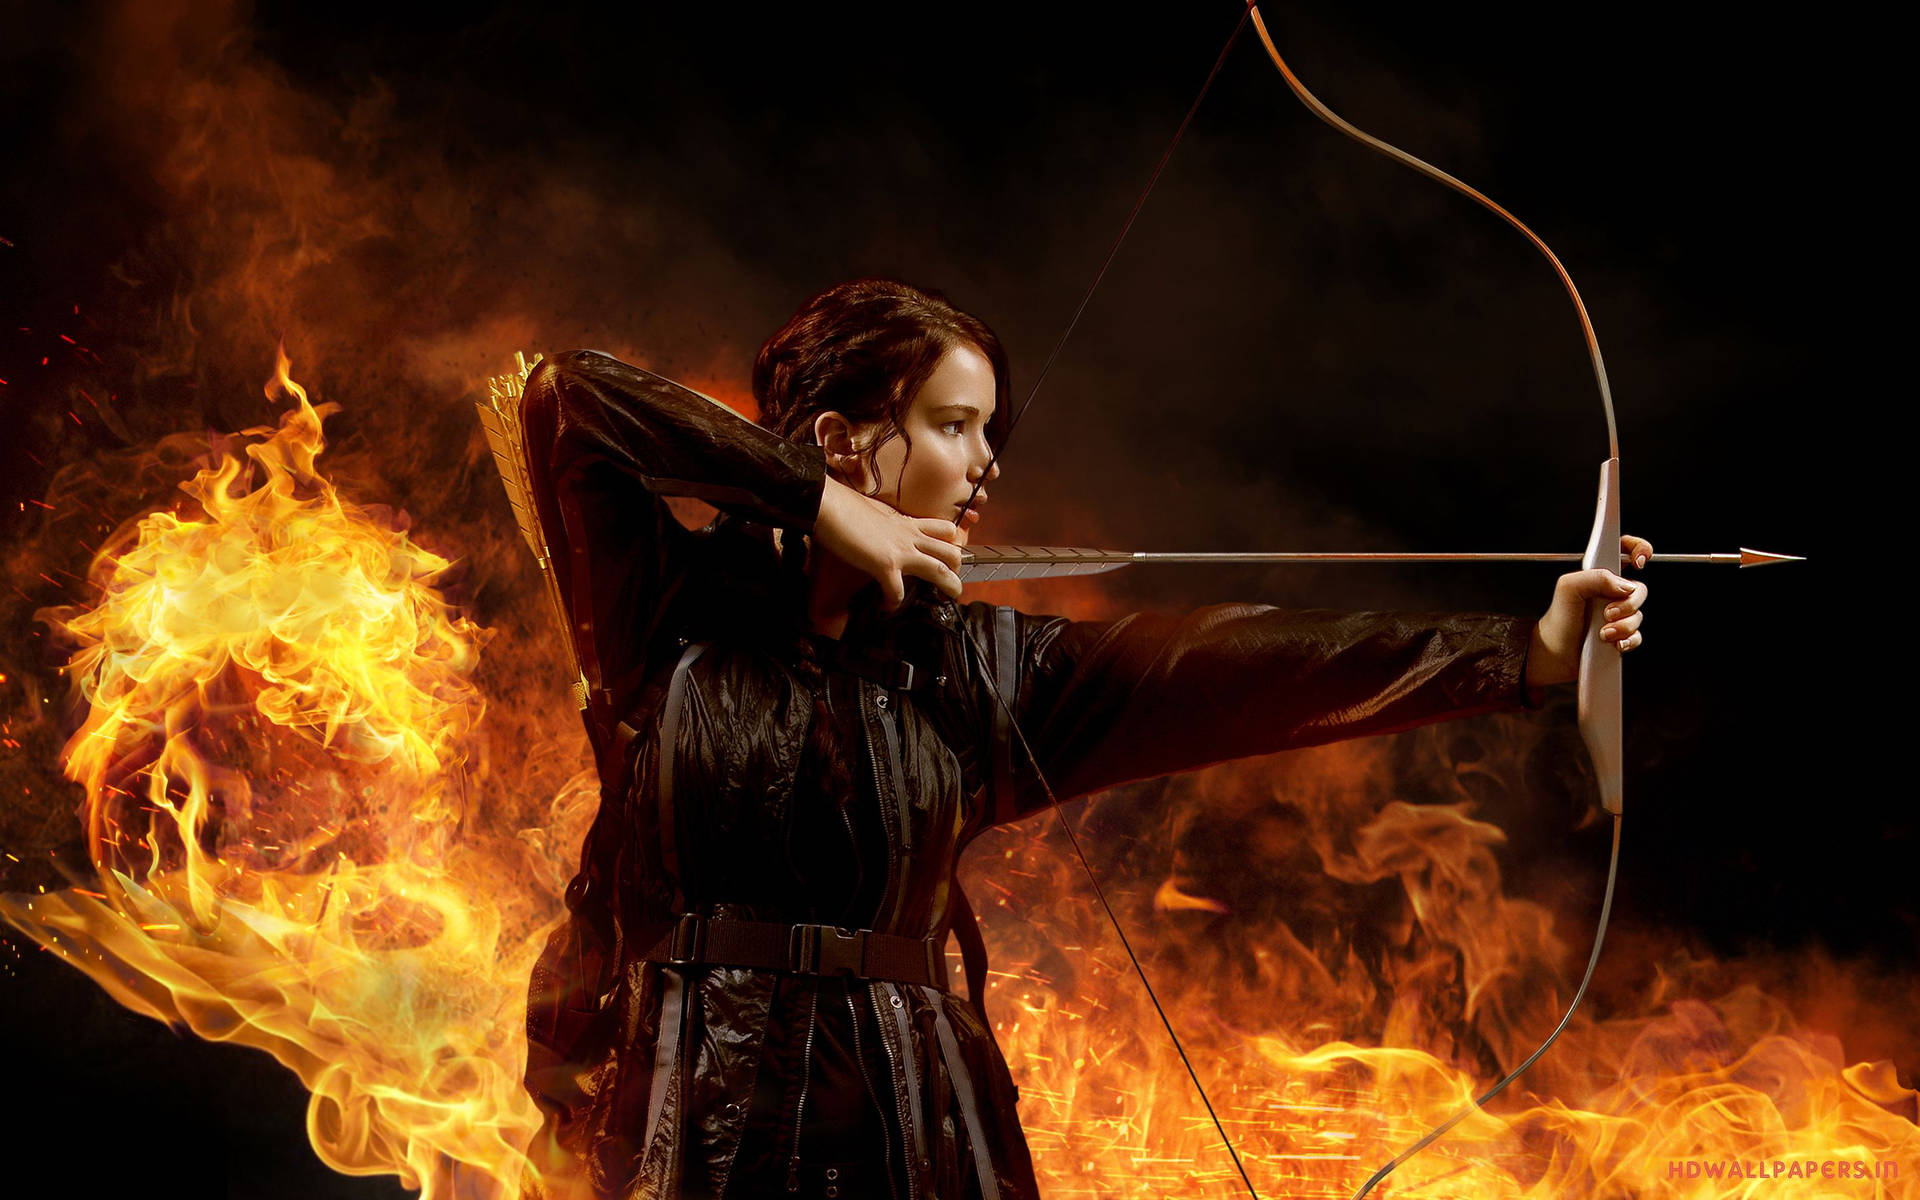 Katniss Everdeen from The Hunger Games Series Aiming with Bow Wallpaper